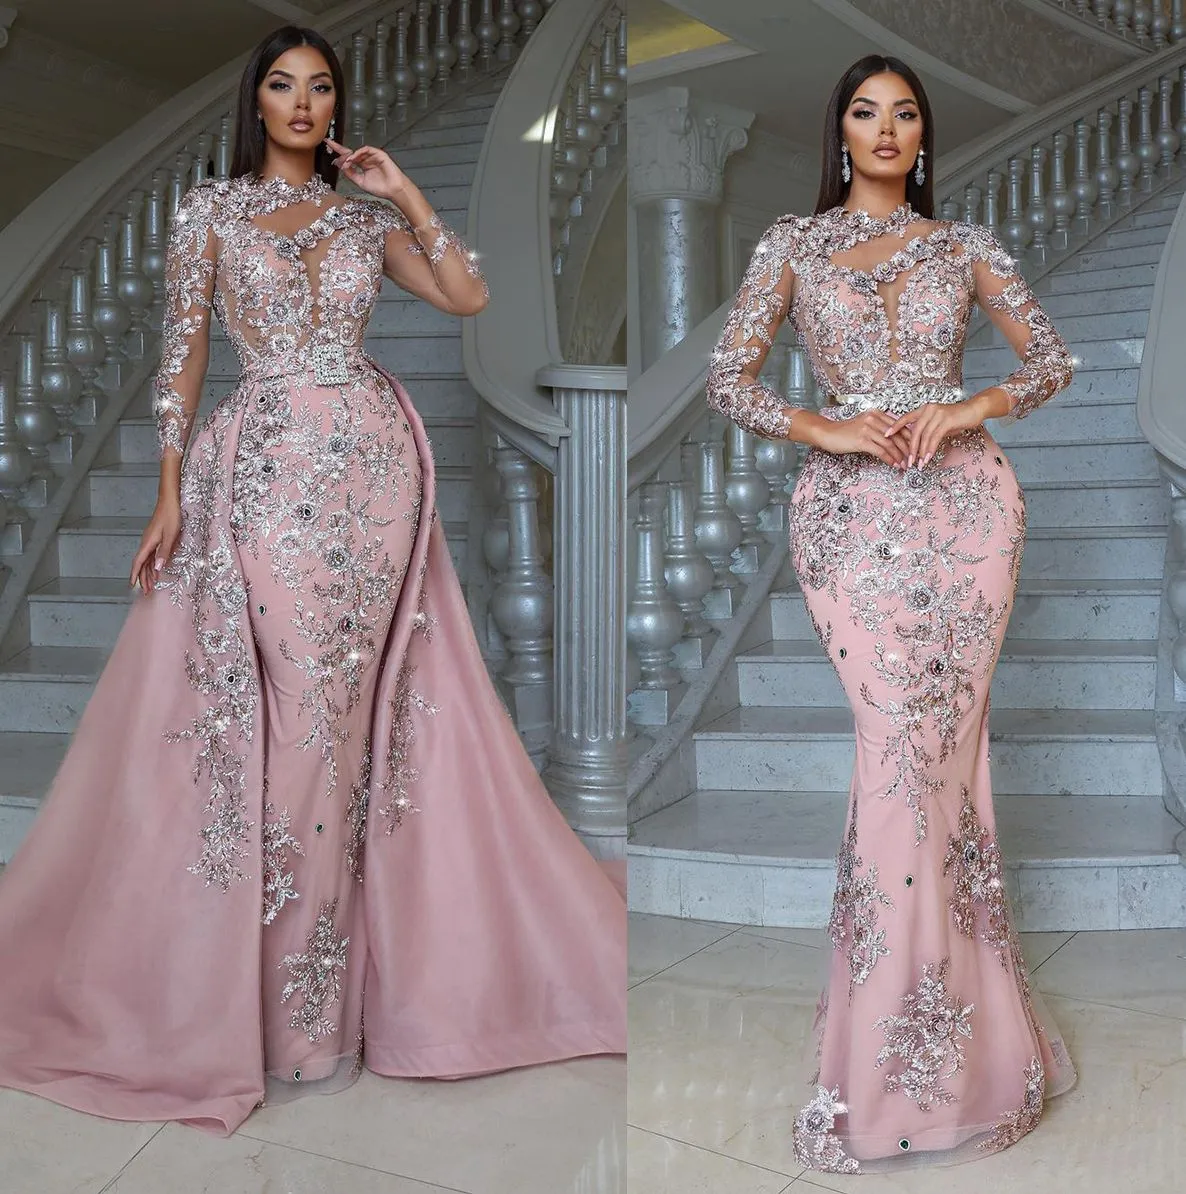 Exquisite Pink Prom Dresses Long Sleeves Beading Lace Tassels Party Dresses Crystals with Overskirts Custom Made Evening Dress